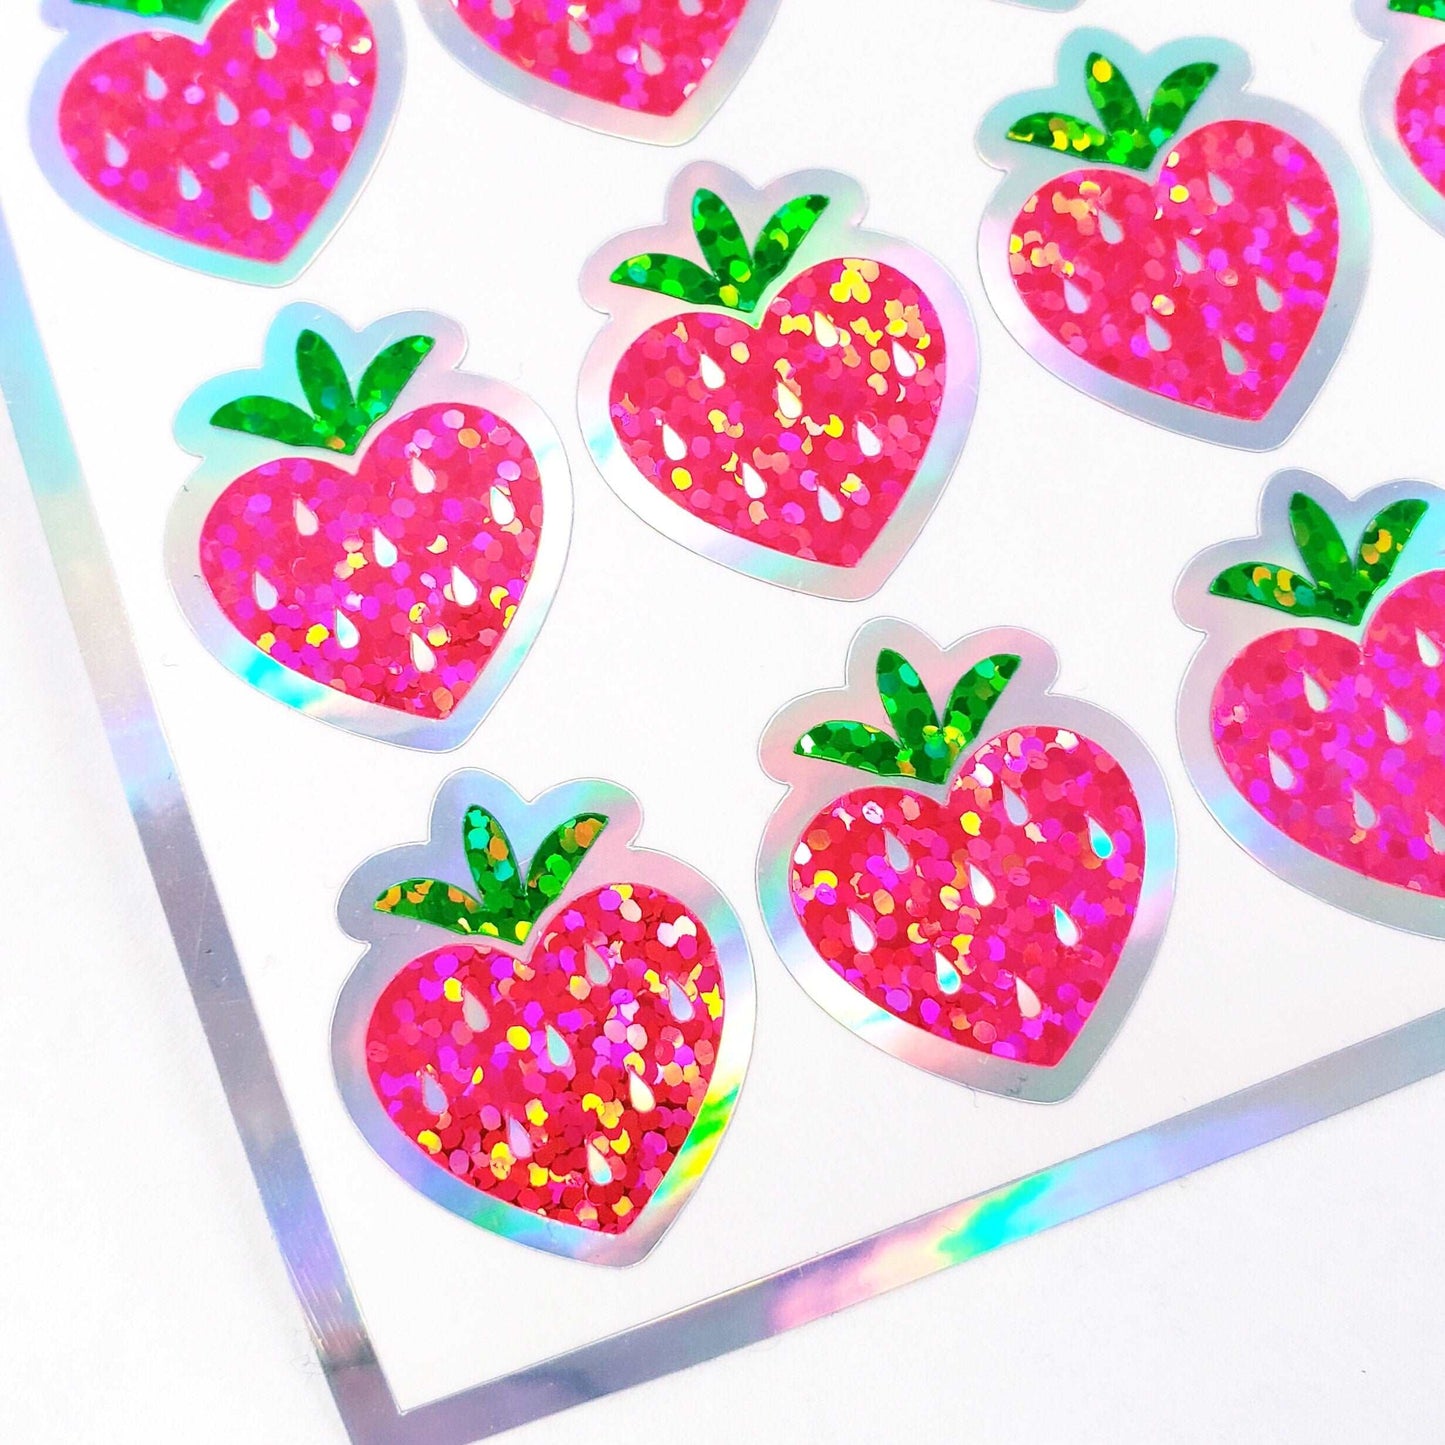 Pink Strawberry Heart Stickers, set of 30 cute fruit glitter decals for Valentine's Day cards, envelope seals, sticker gift for teachers.